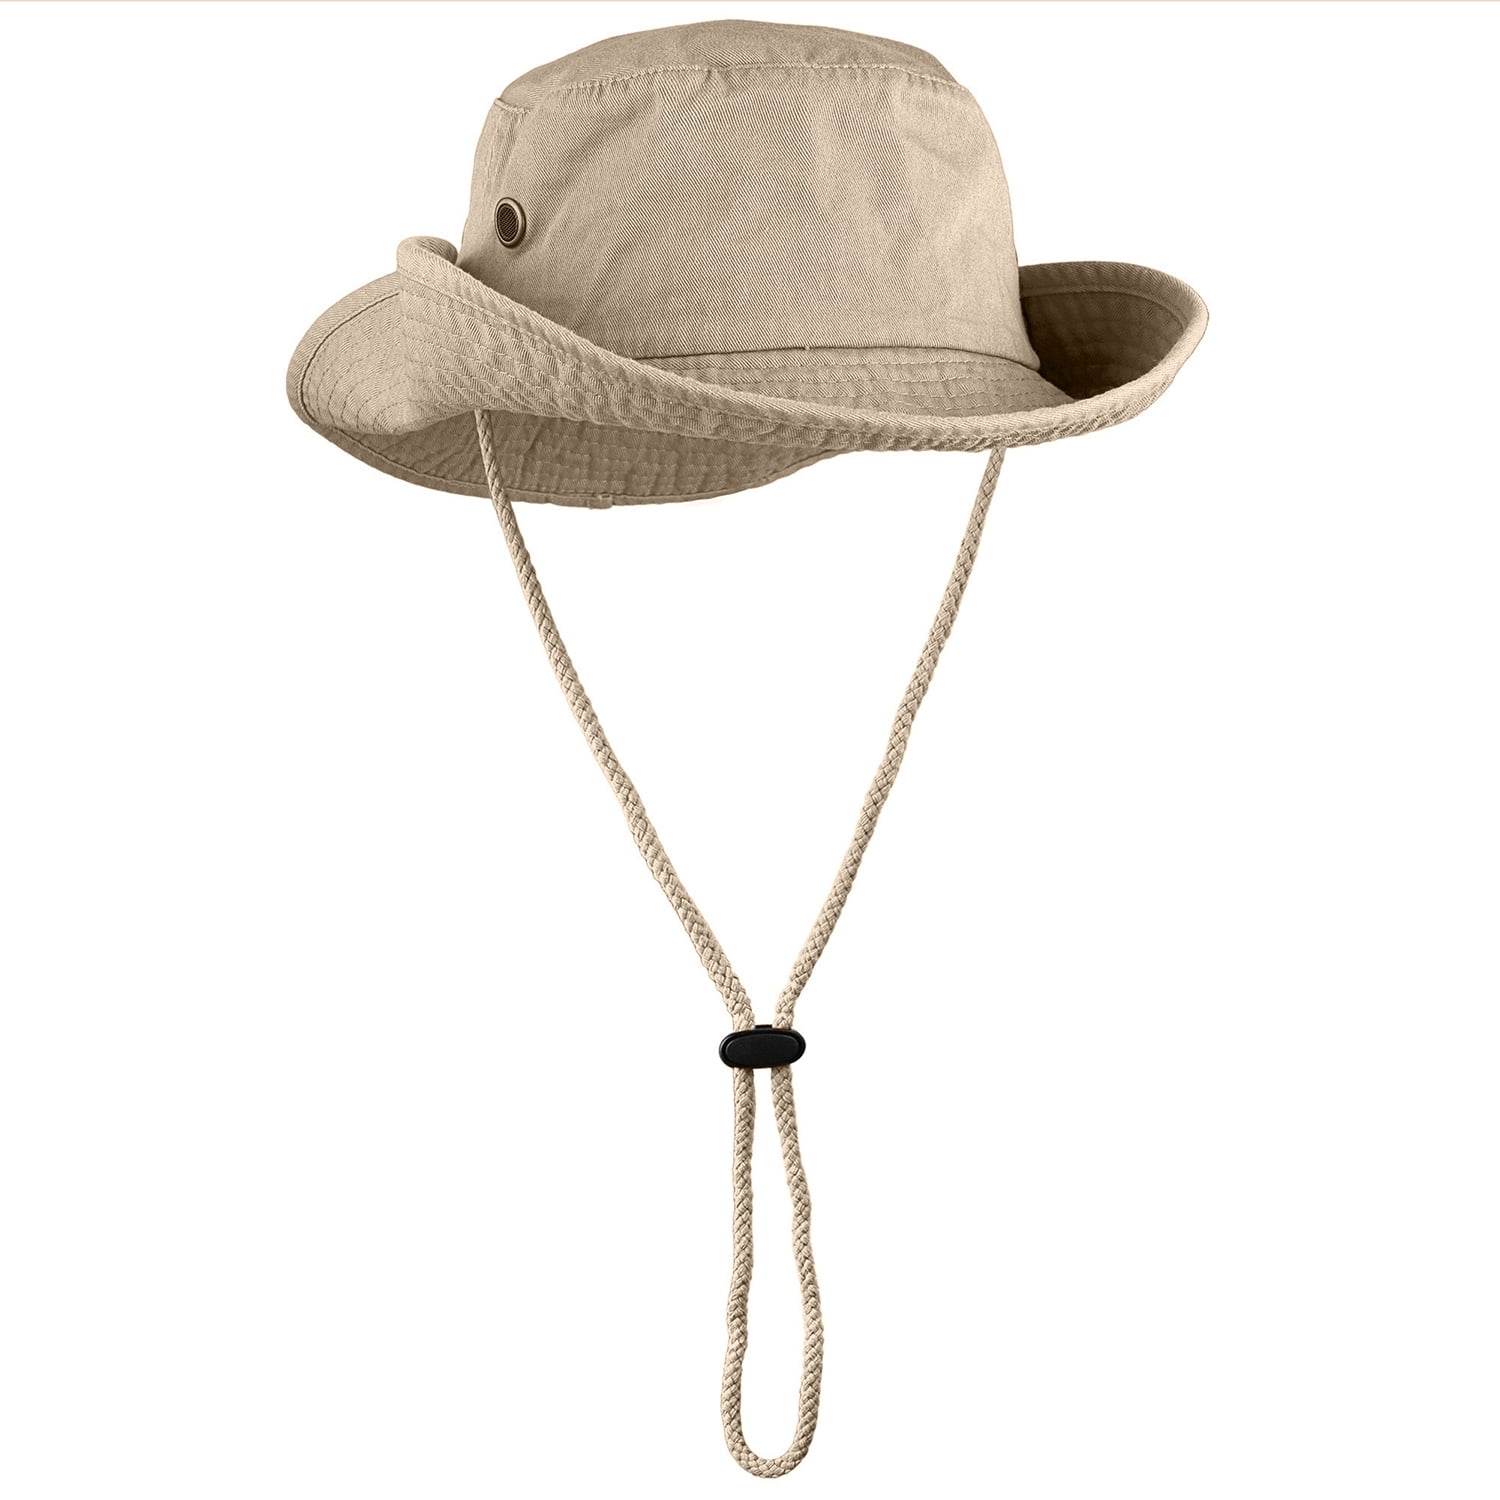 Clakllie Breathable Boonie Sun Hat with Wide Brim UPF 50+ Summer Fishing  Hats Cowboy Style Bucket Hat for Beach Hiking Safari